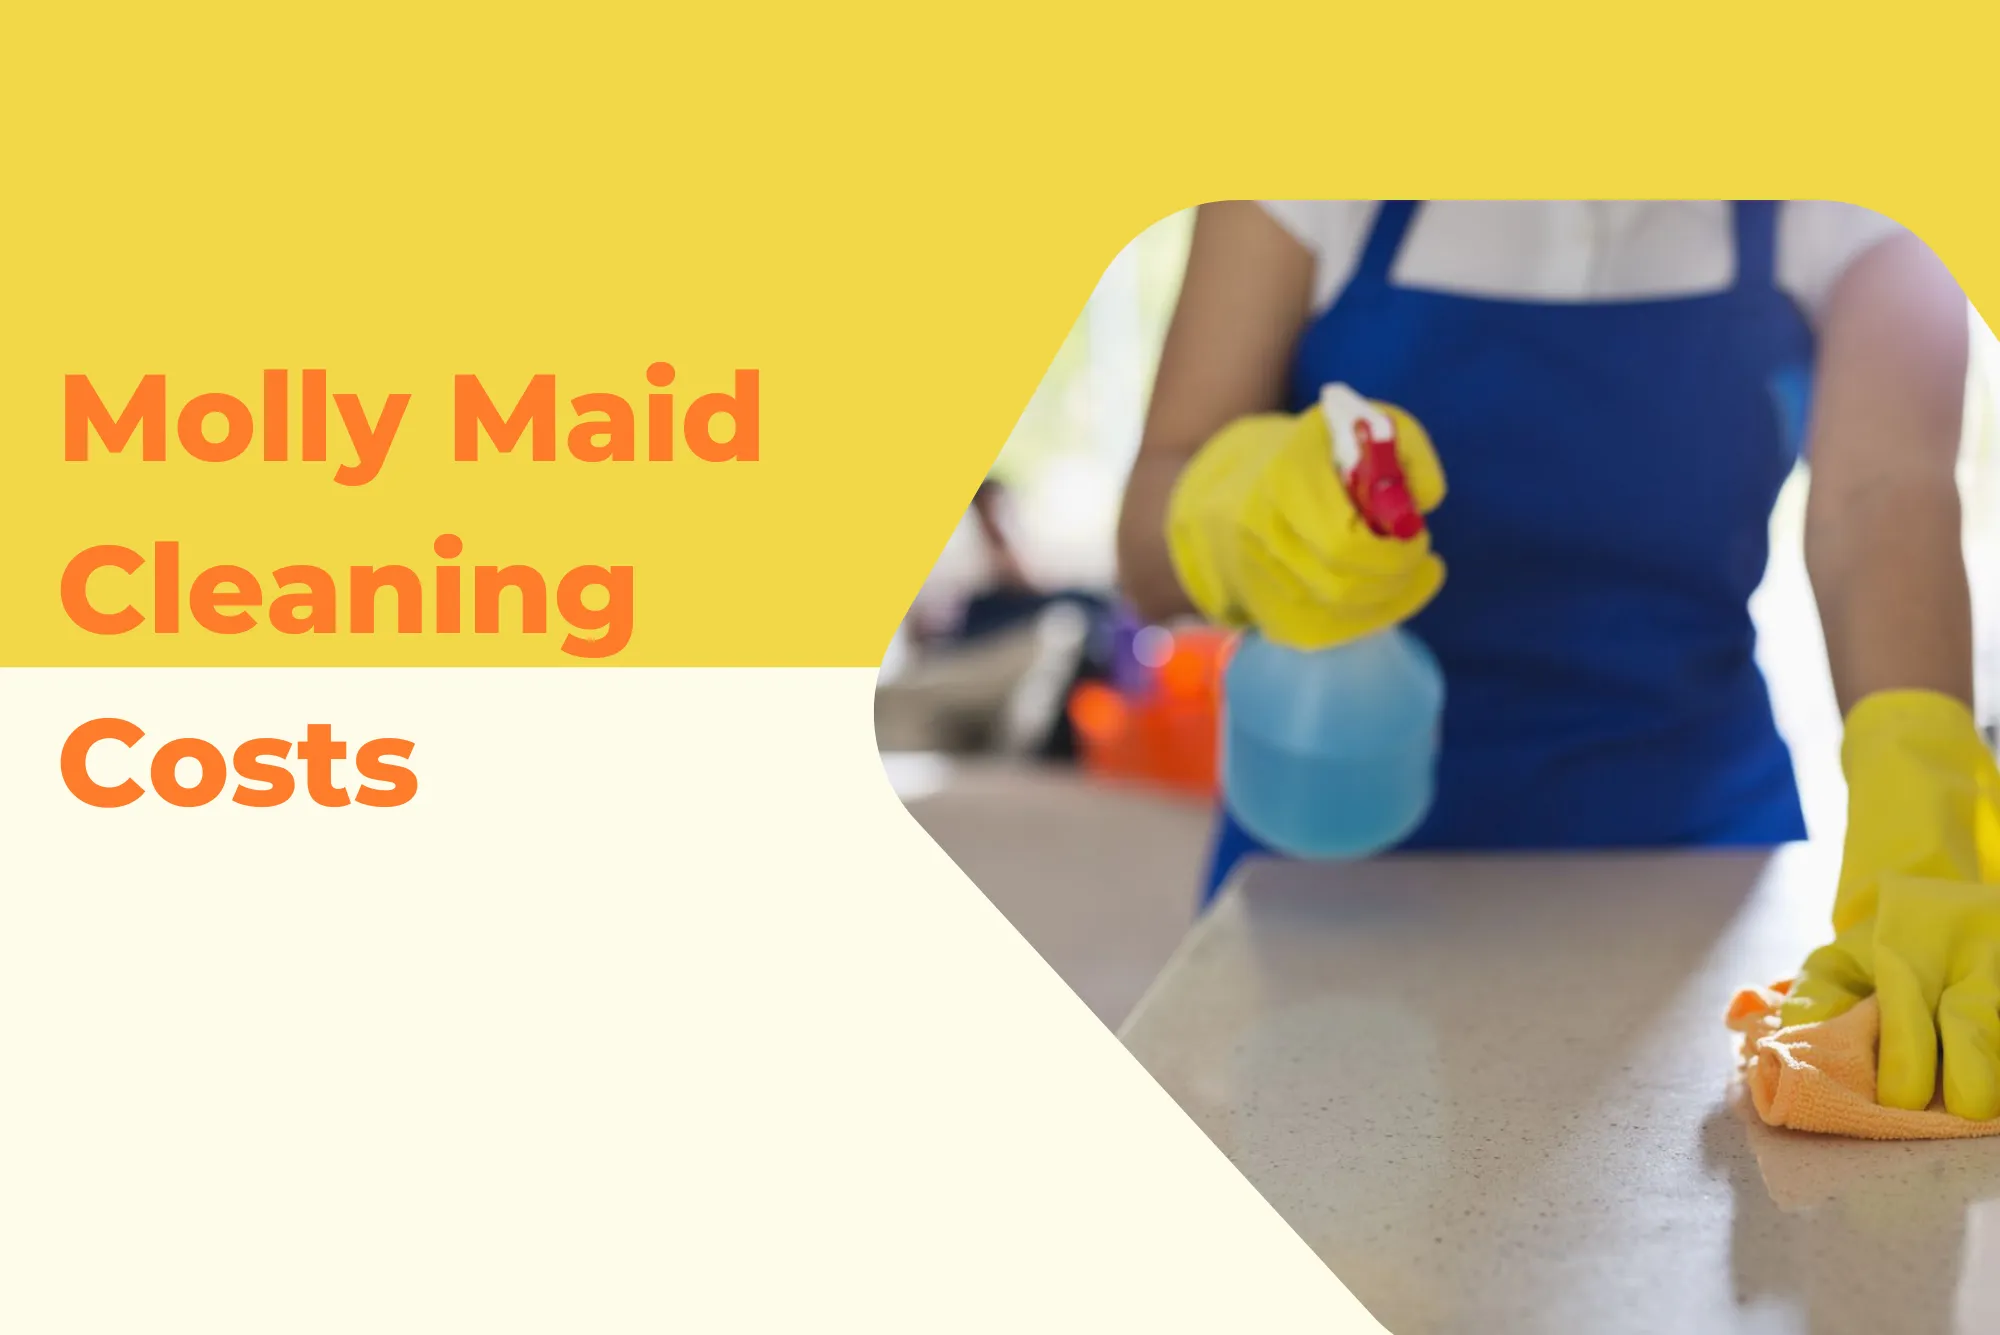 Molly Maid Cleaning Costs